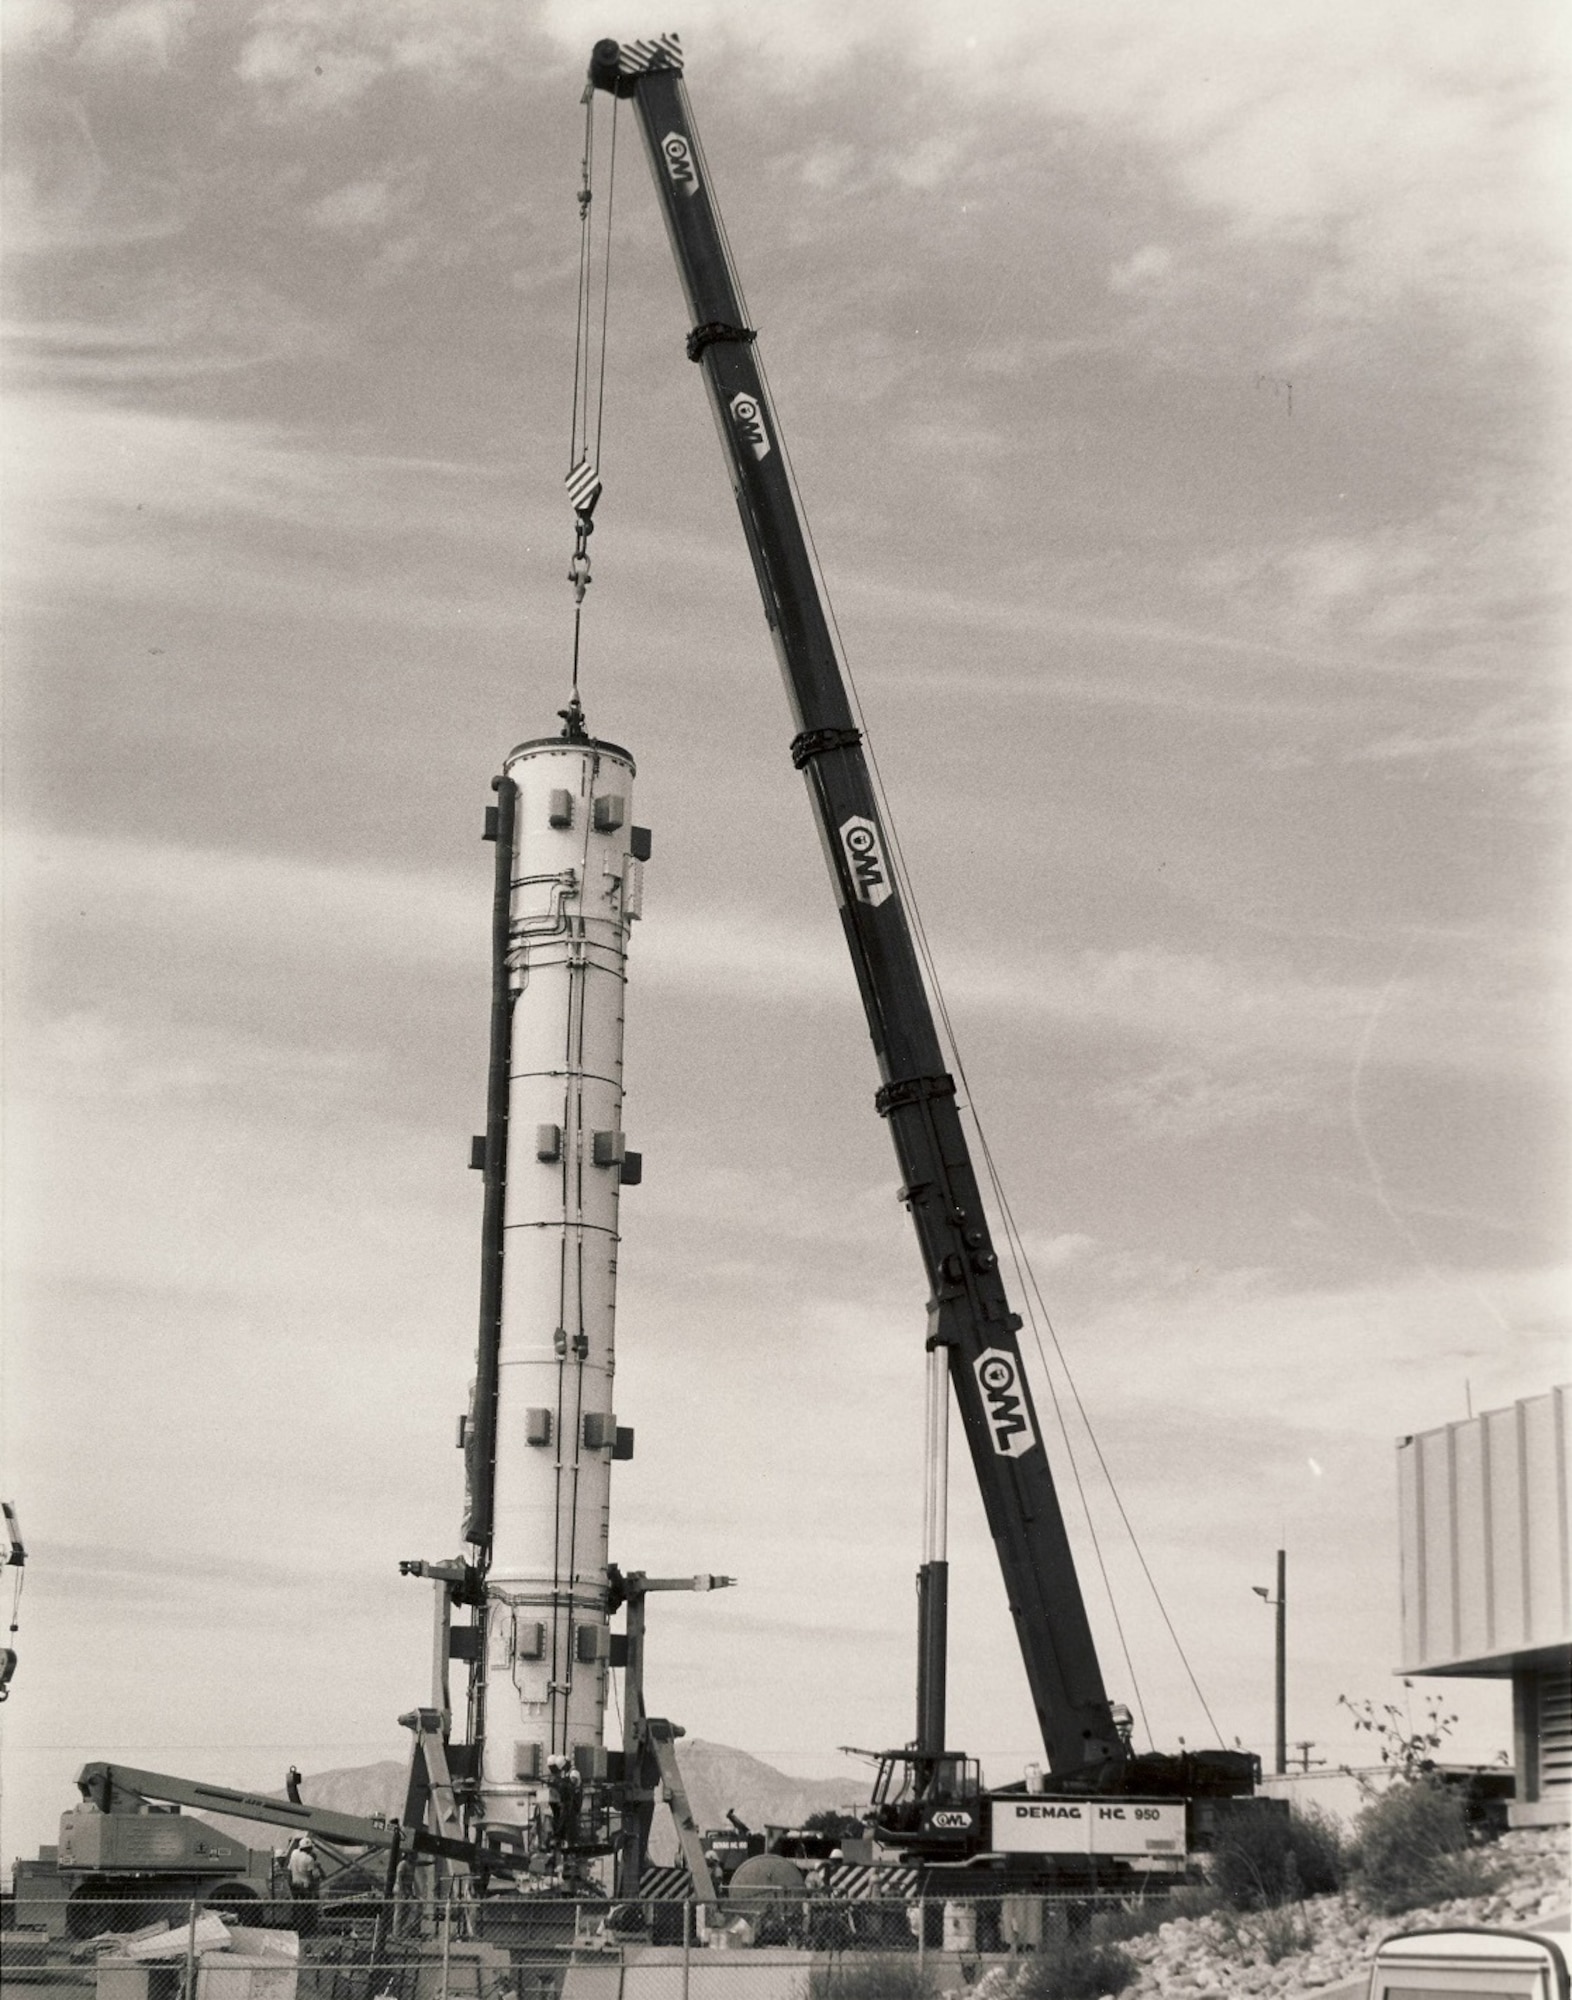 The Hill Engineering and Test Facility received several upgrades and additions during the 1960s, 70s, and 80s. During 1989, the Peacekeeper ICBM portion of the facility became operational. This photograph depicts the installation of an inert Peacekeeper ICBM as it was lowered into its silo at the facility.